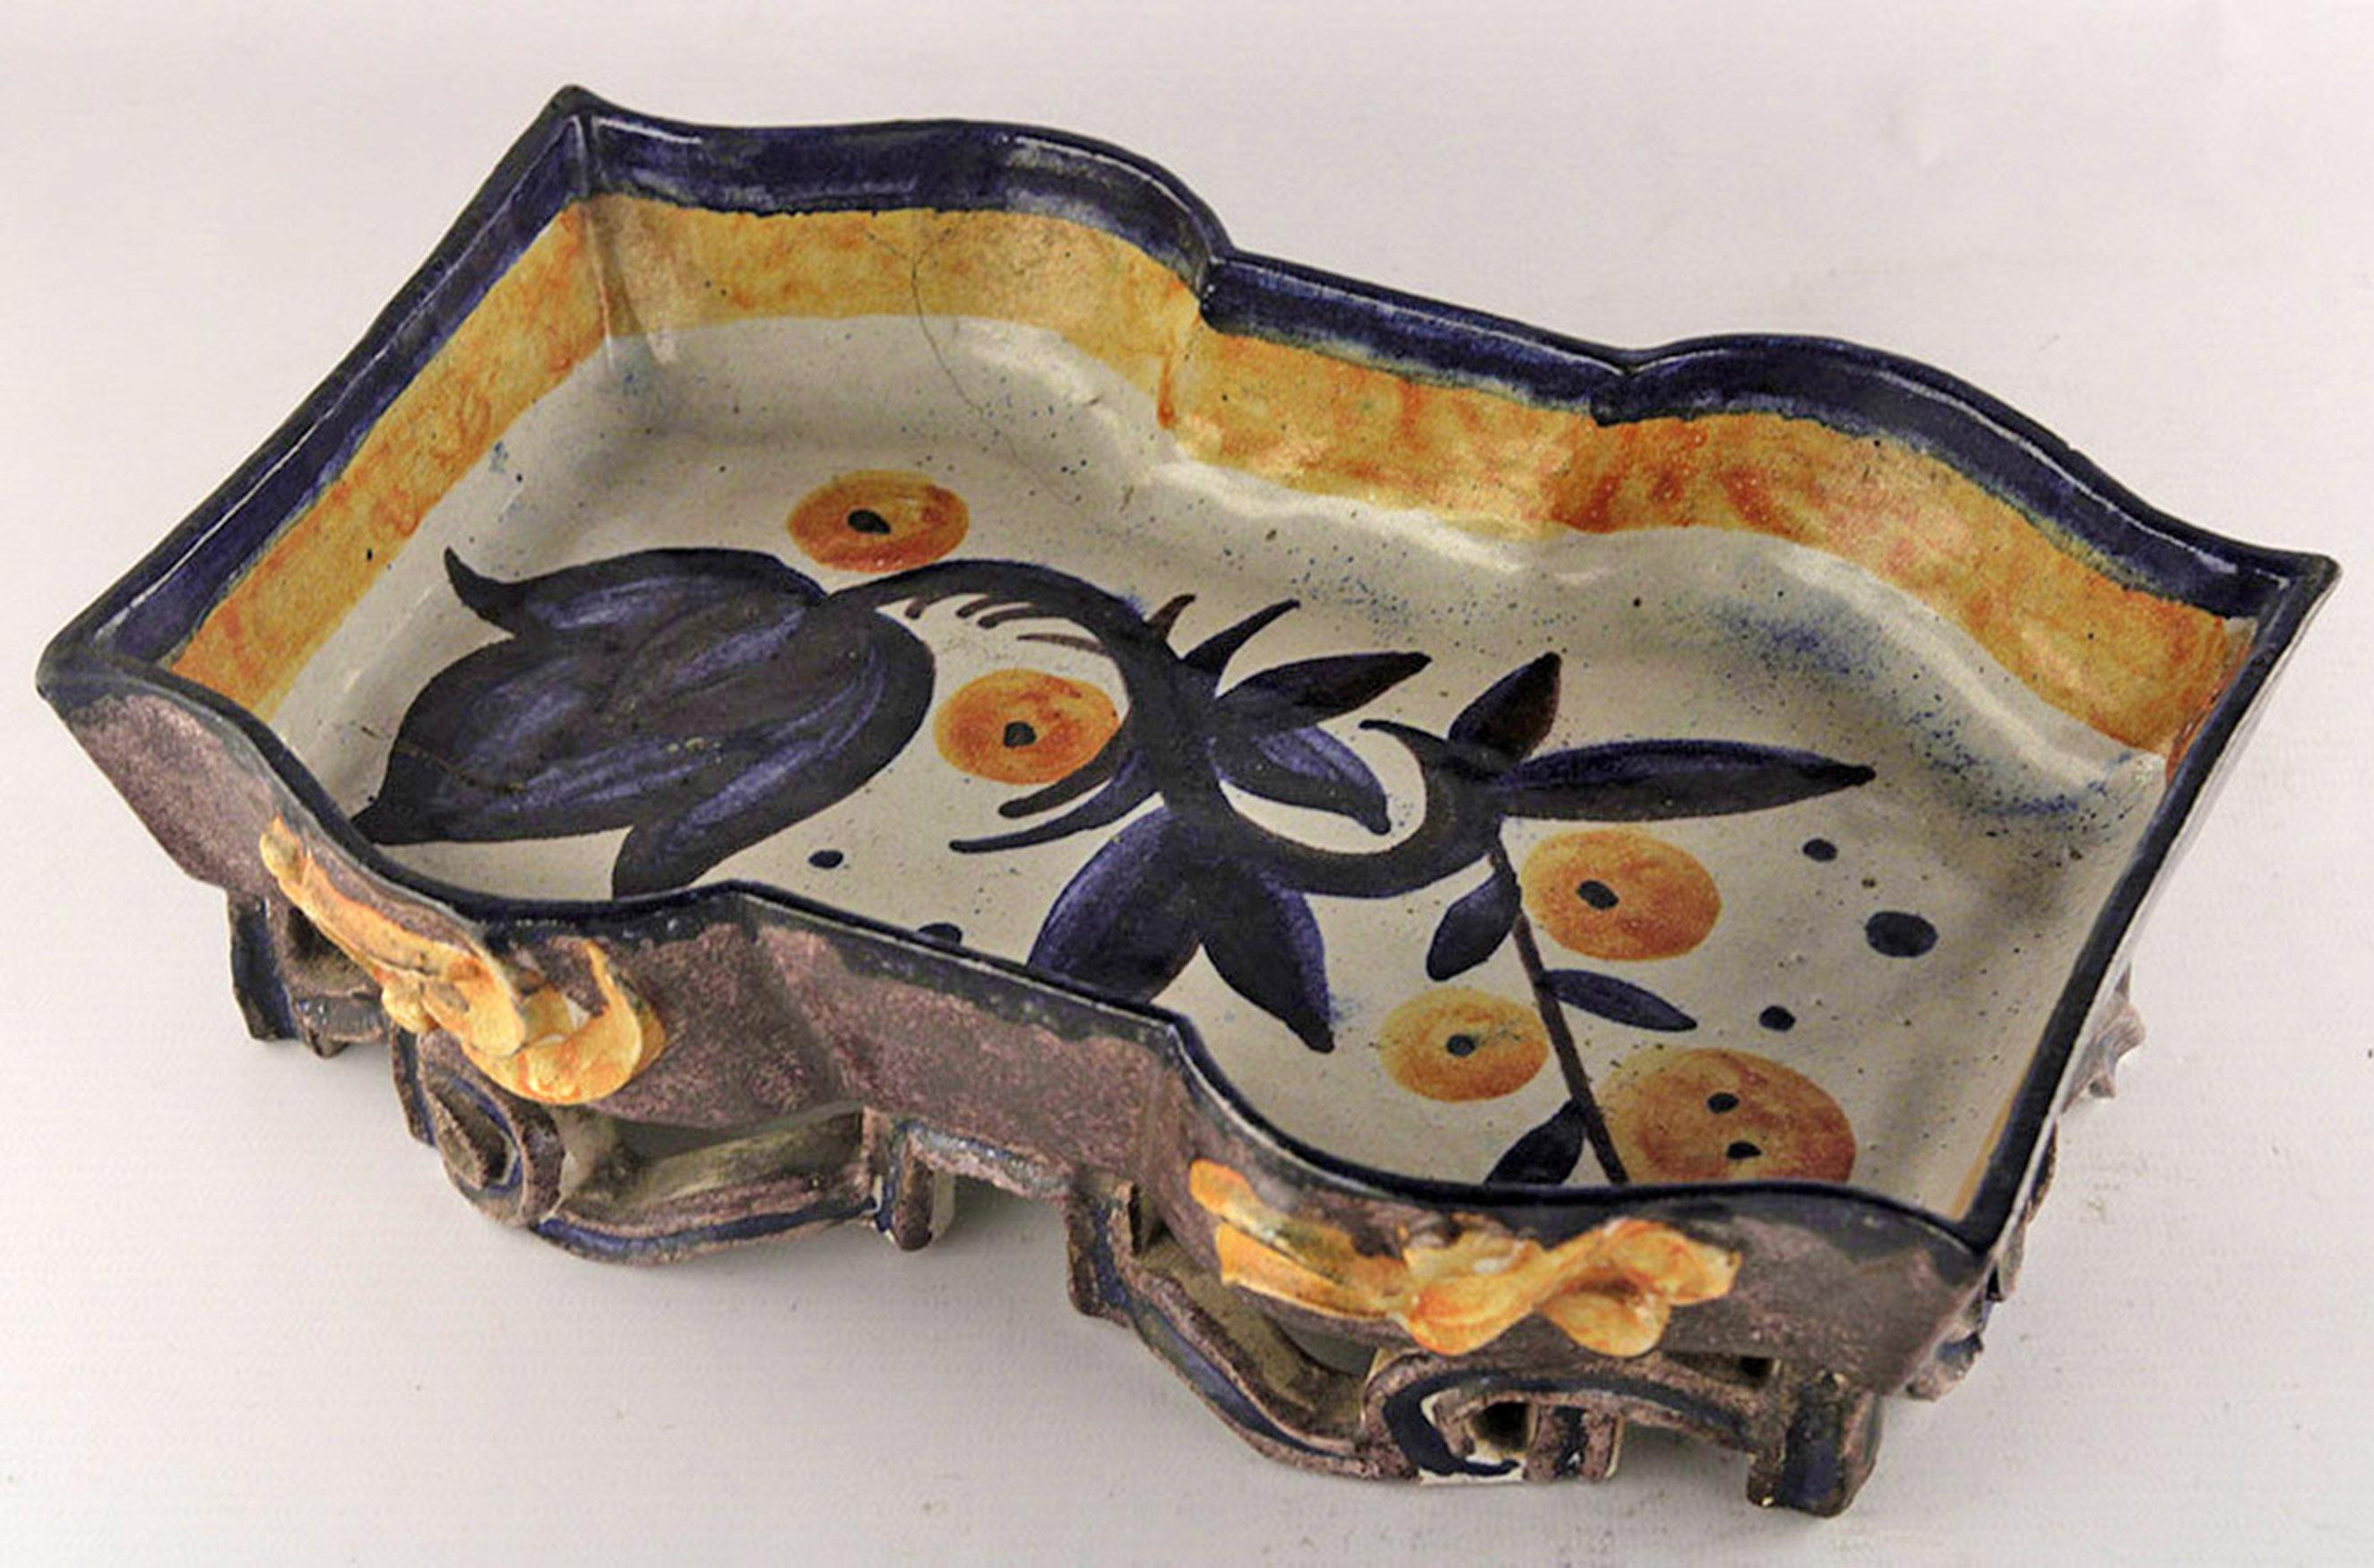 Early 20th century Vienna Secession austrian painted ceramic centerpiece by Vally Wieselthier for Wiener Werkstätte

By: Vally Wieselthier, Wiener Werkstätte
Material: ceramic, paint
Technique: molded, pressed, painted, hand-painted
Dimensions: 7.5